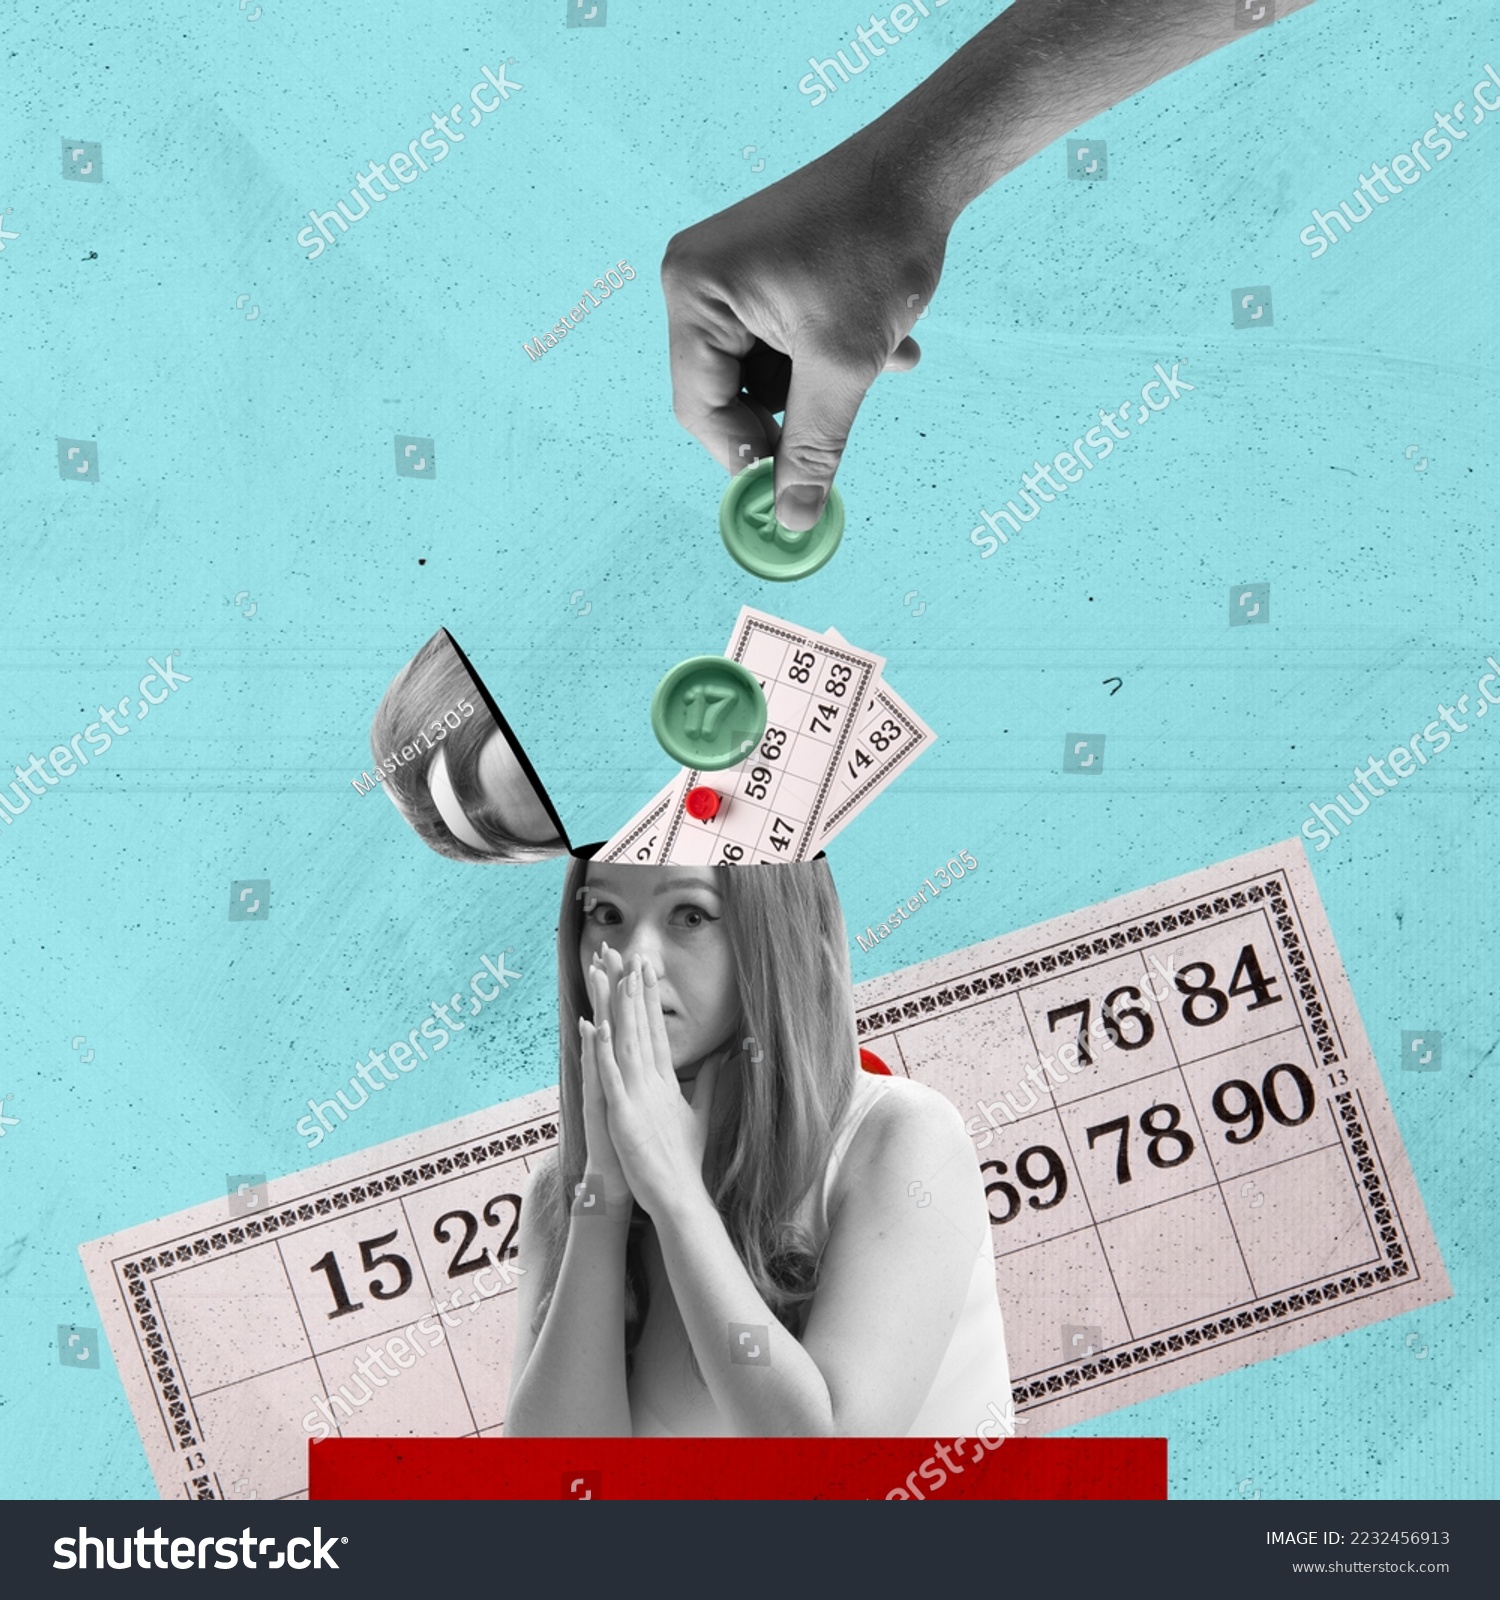 Contemporary art collage. Creative design. Young emotive woman playing lotto, bingo. Online gaming. Betting. Concept of game, hobby, leisure time, intellectual game strategy, creativity #2232456913